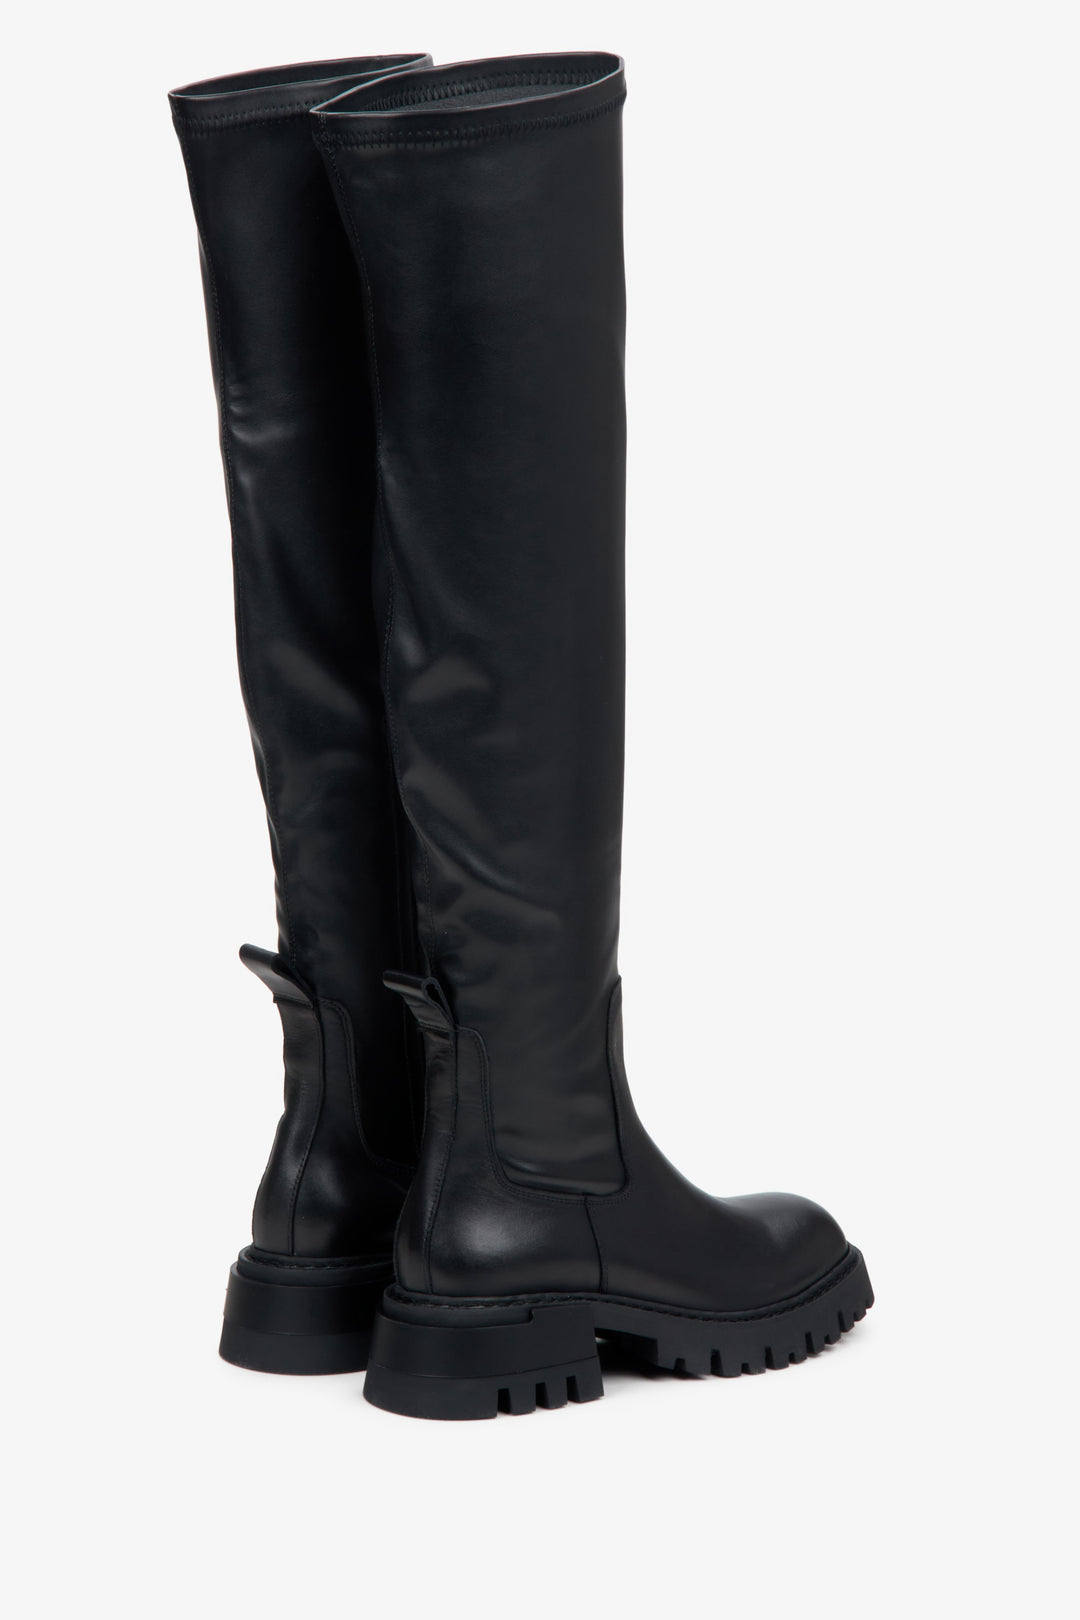 Women's black leather boots by Estro - close-up on the back.